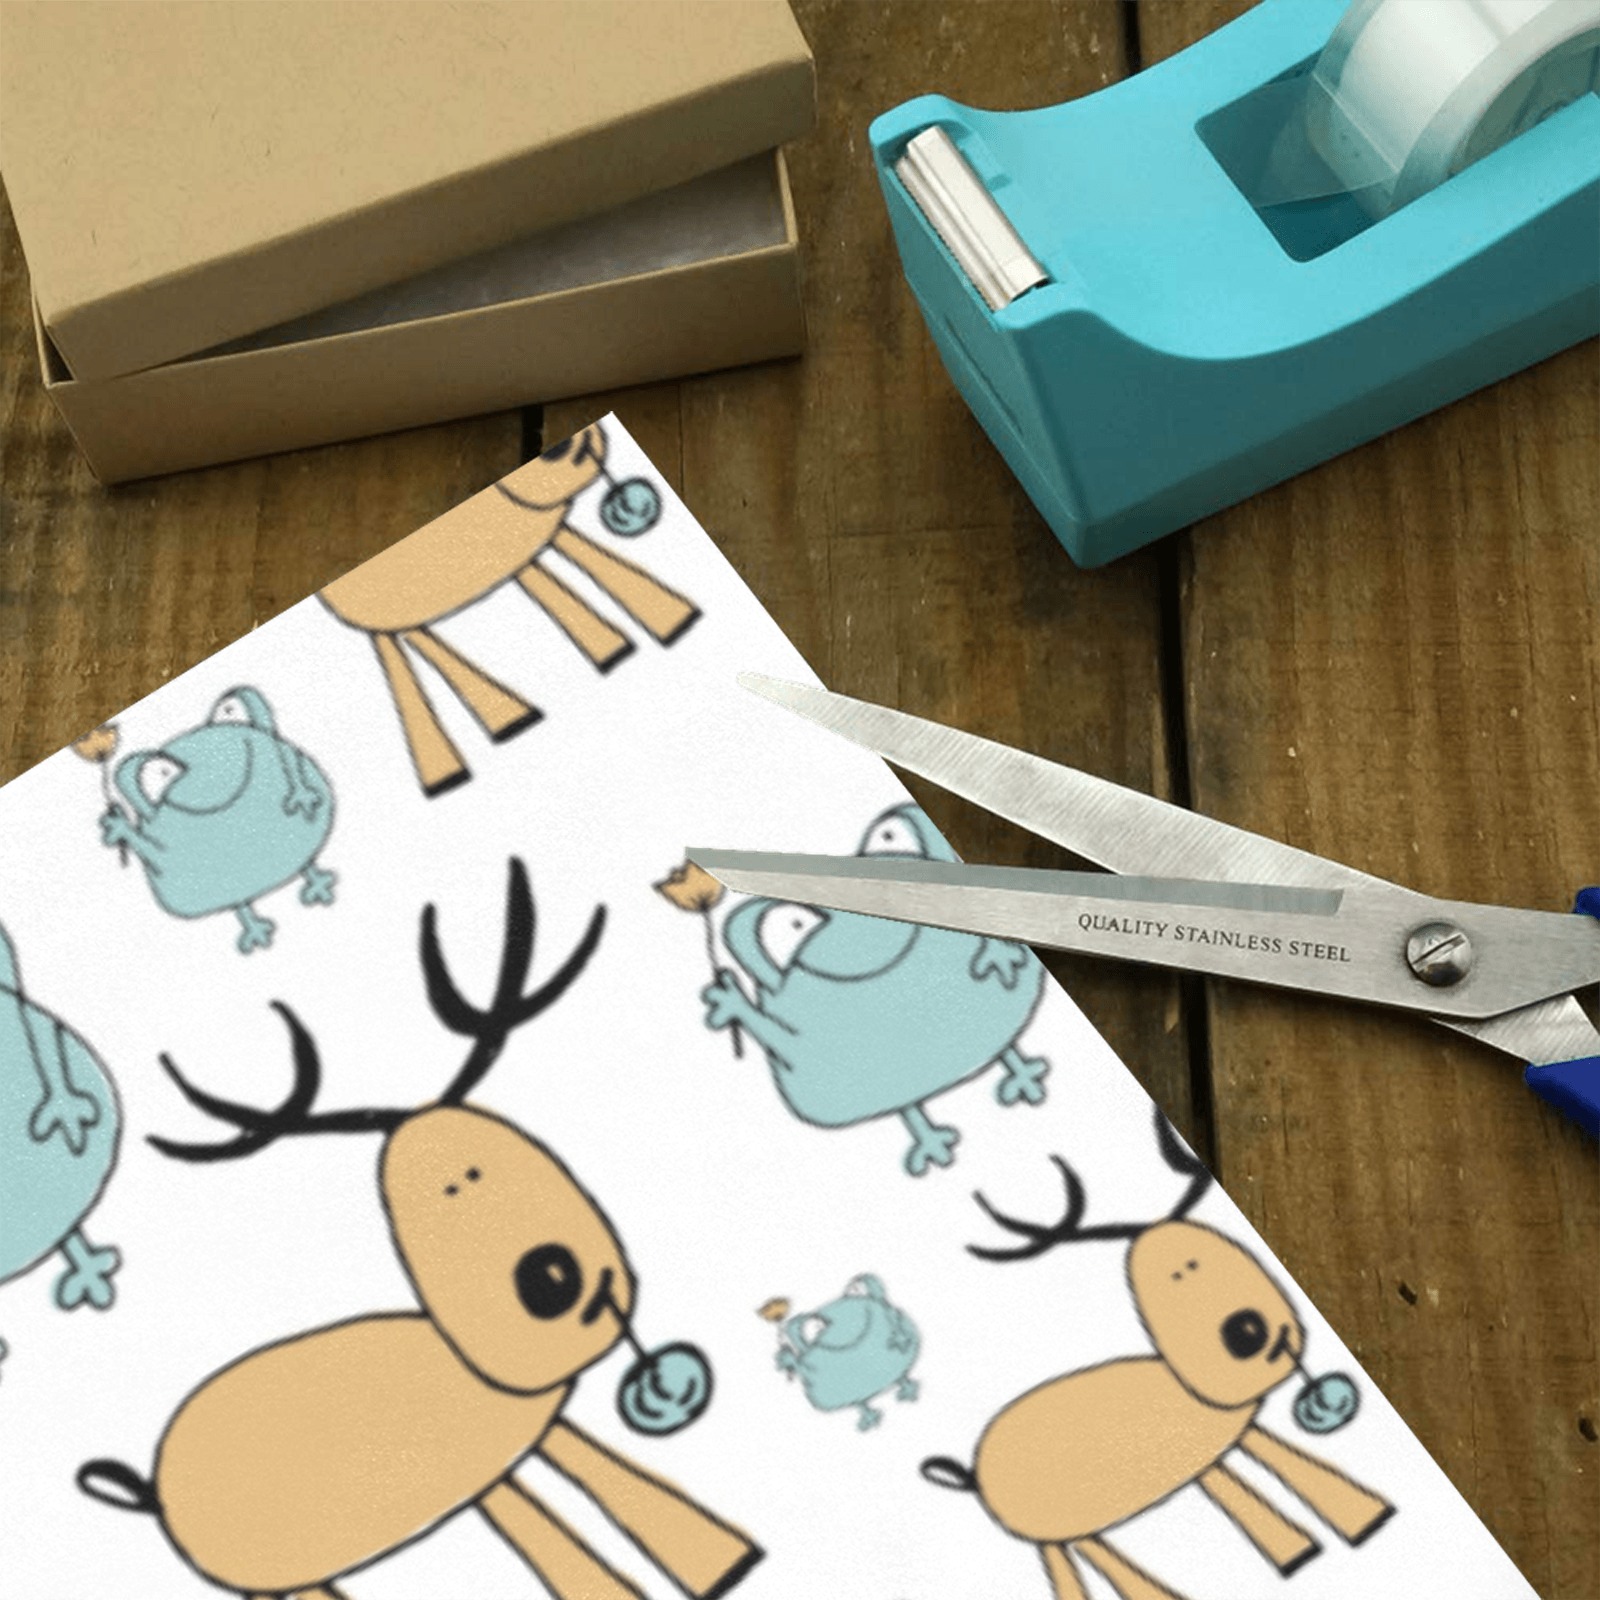 Frogs And Reindeer Pattern Gift Wrapping Paper 58"x 23" (1 Roll)